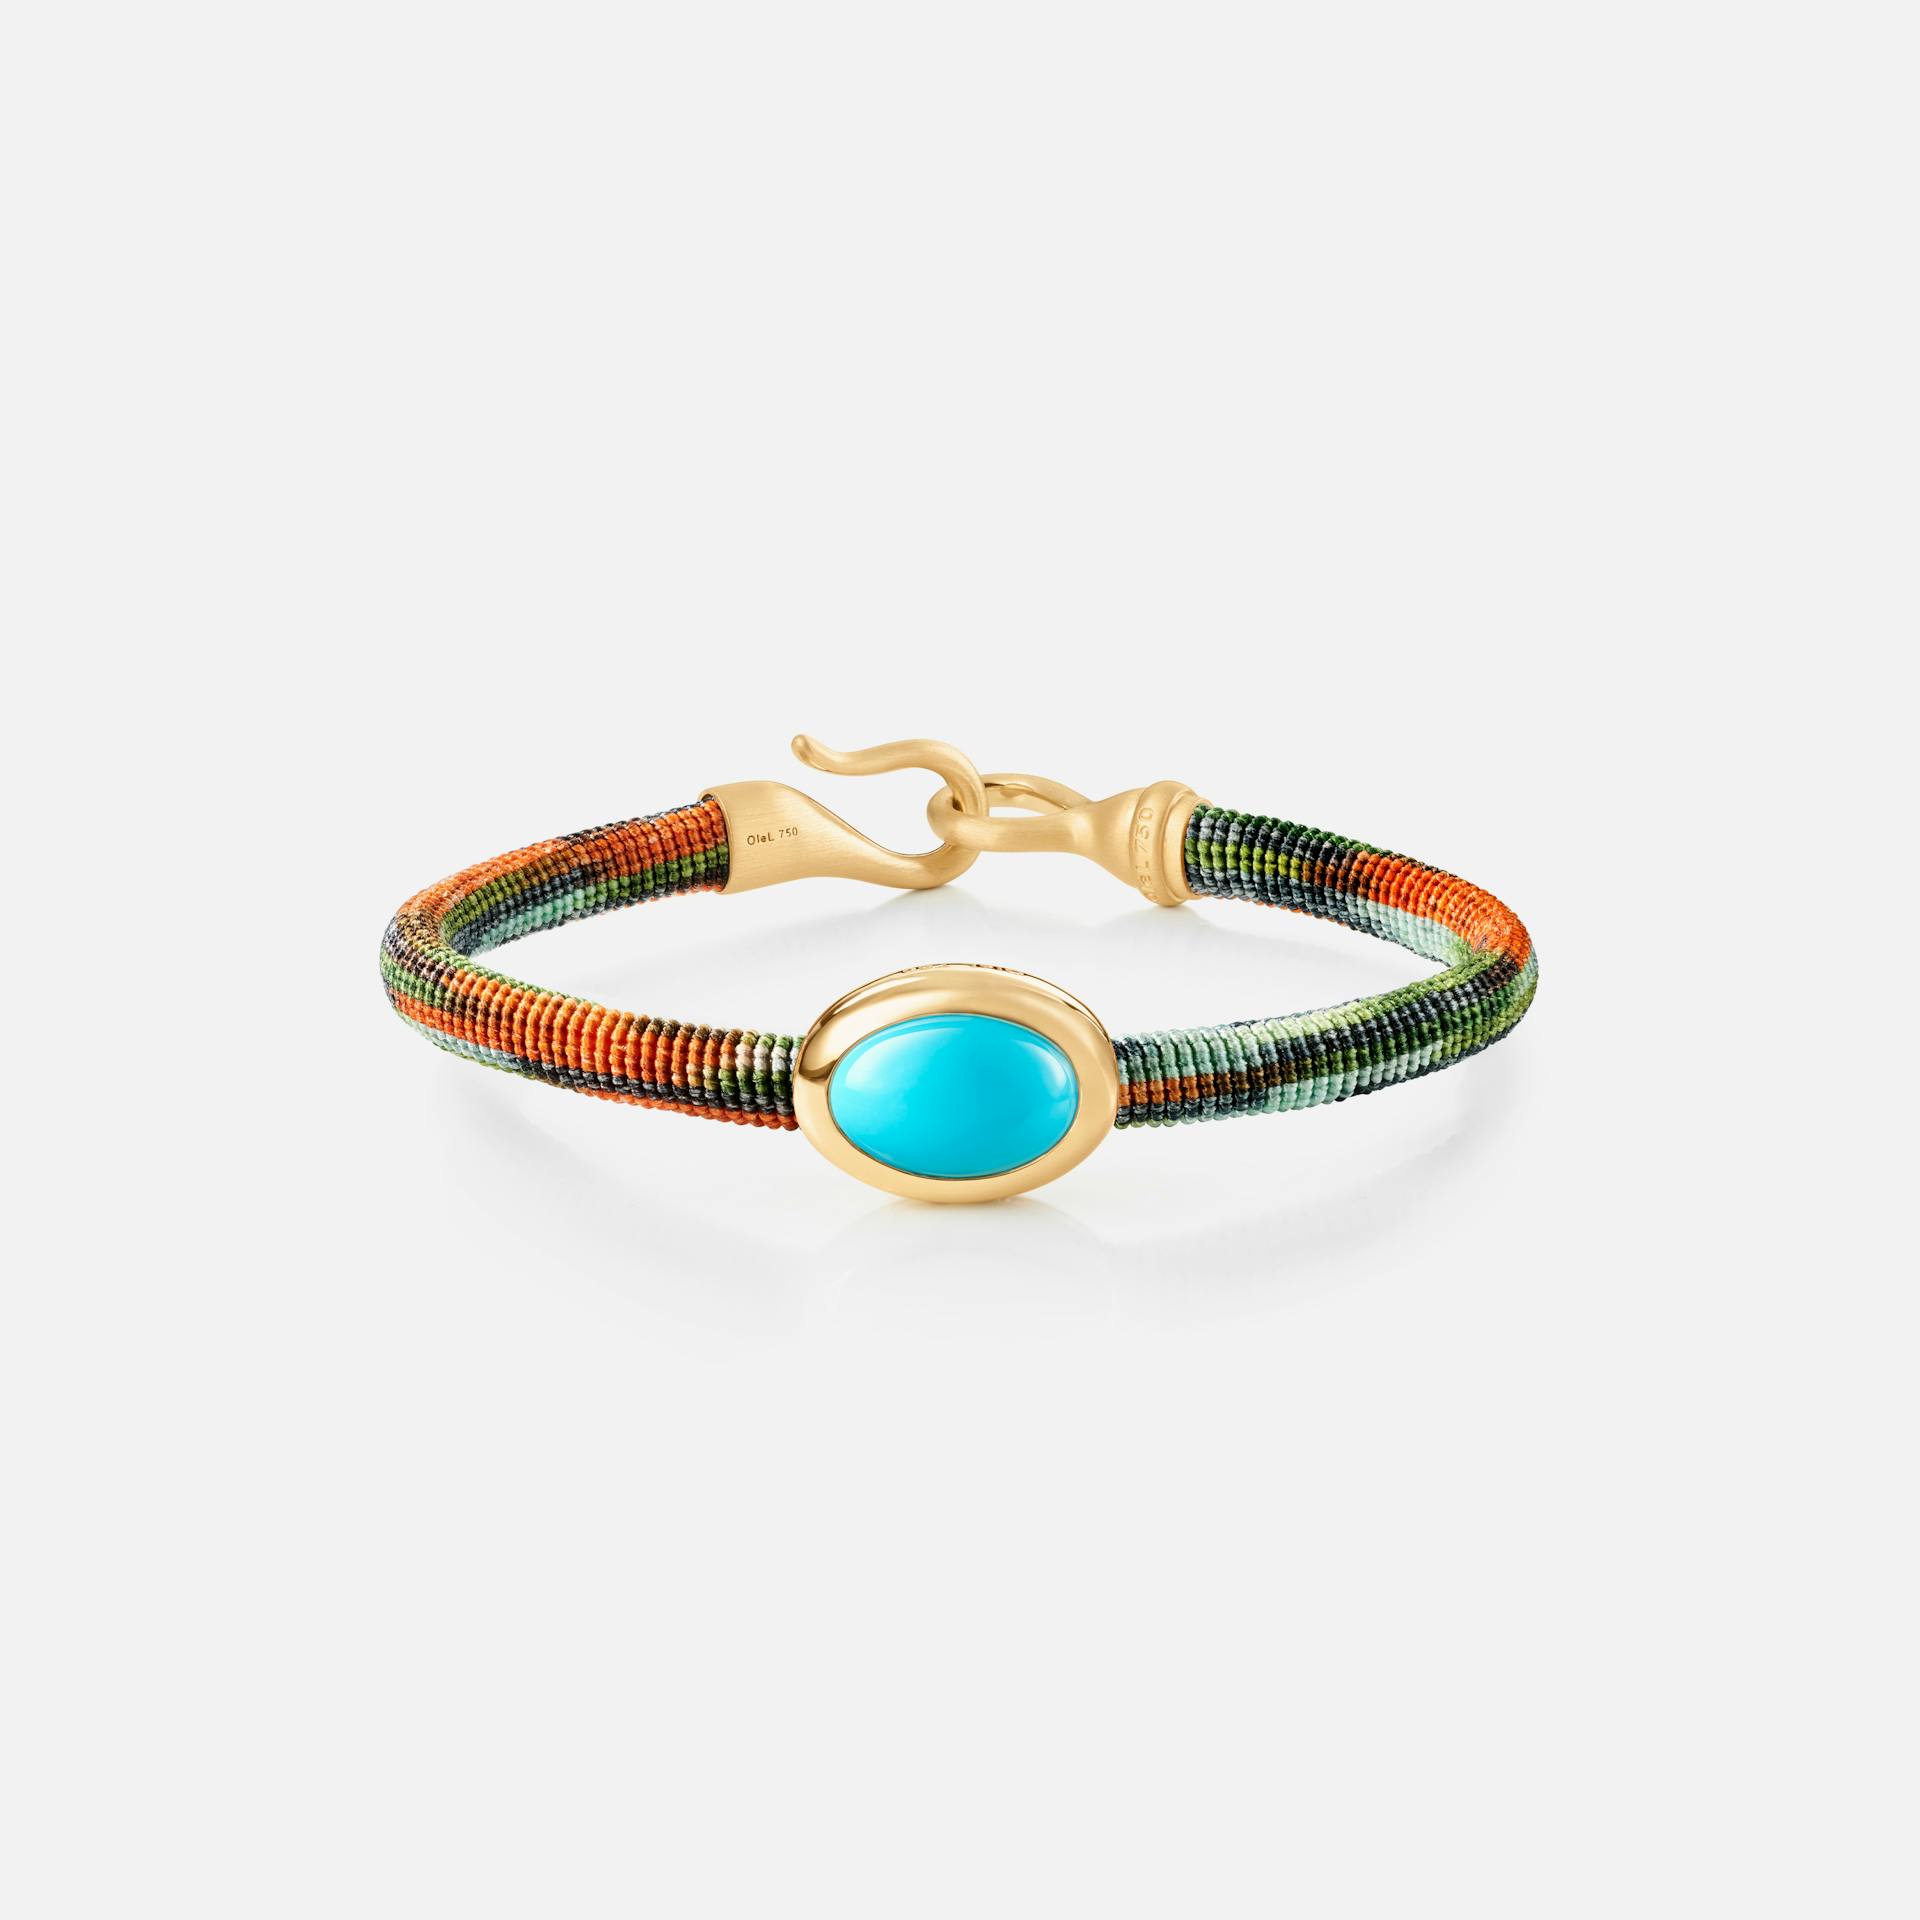 Life Bracelet with turquoise 6 mm 18k gold and turquoise with Tropic rope